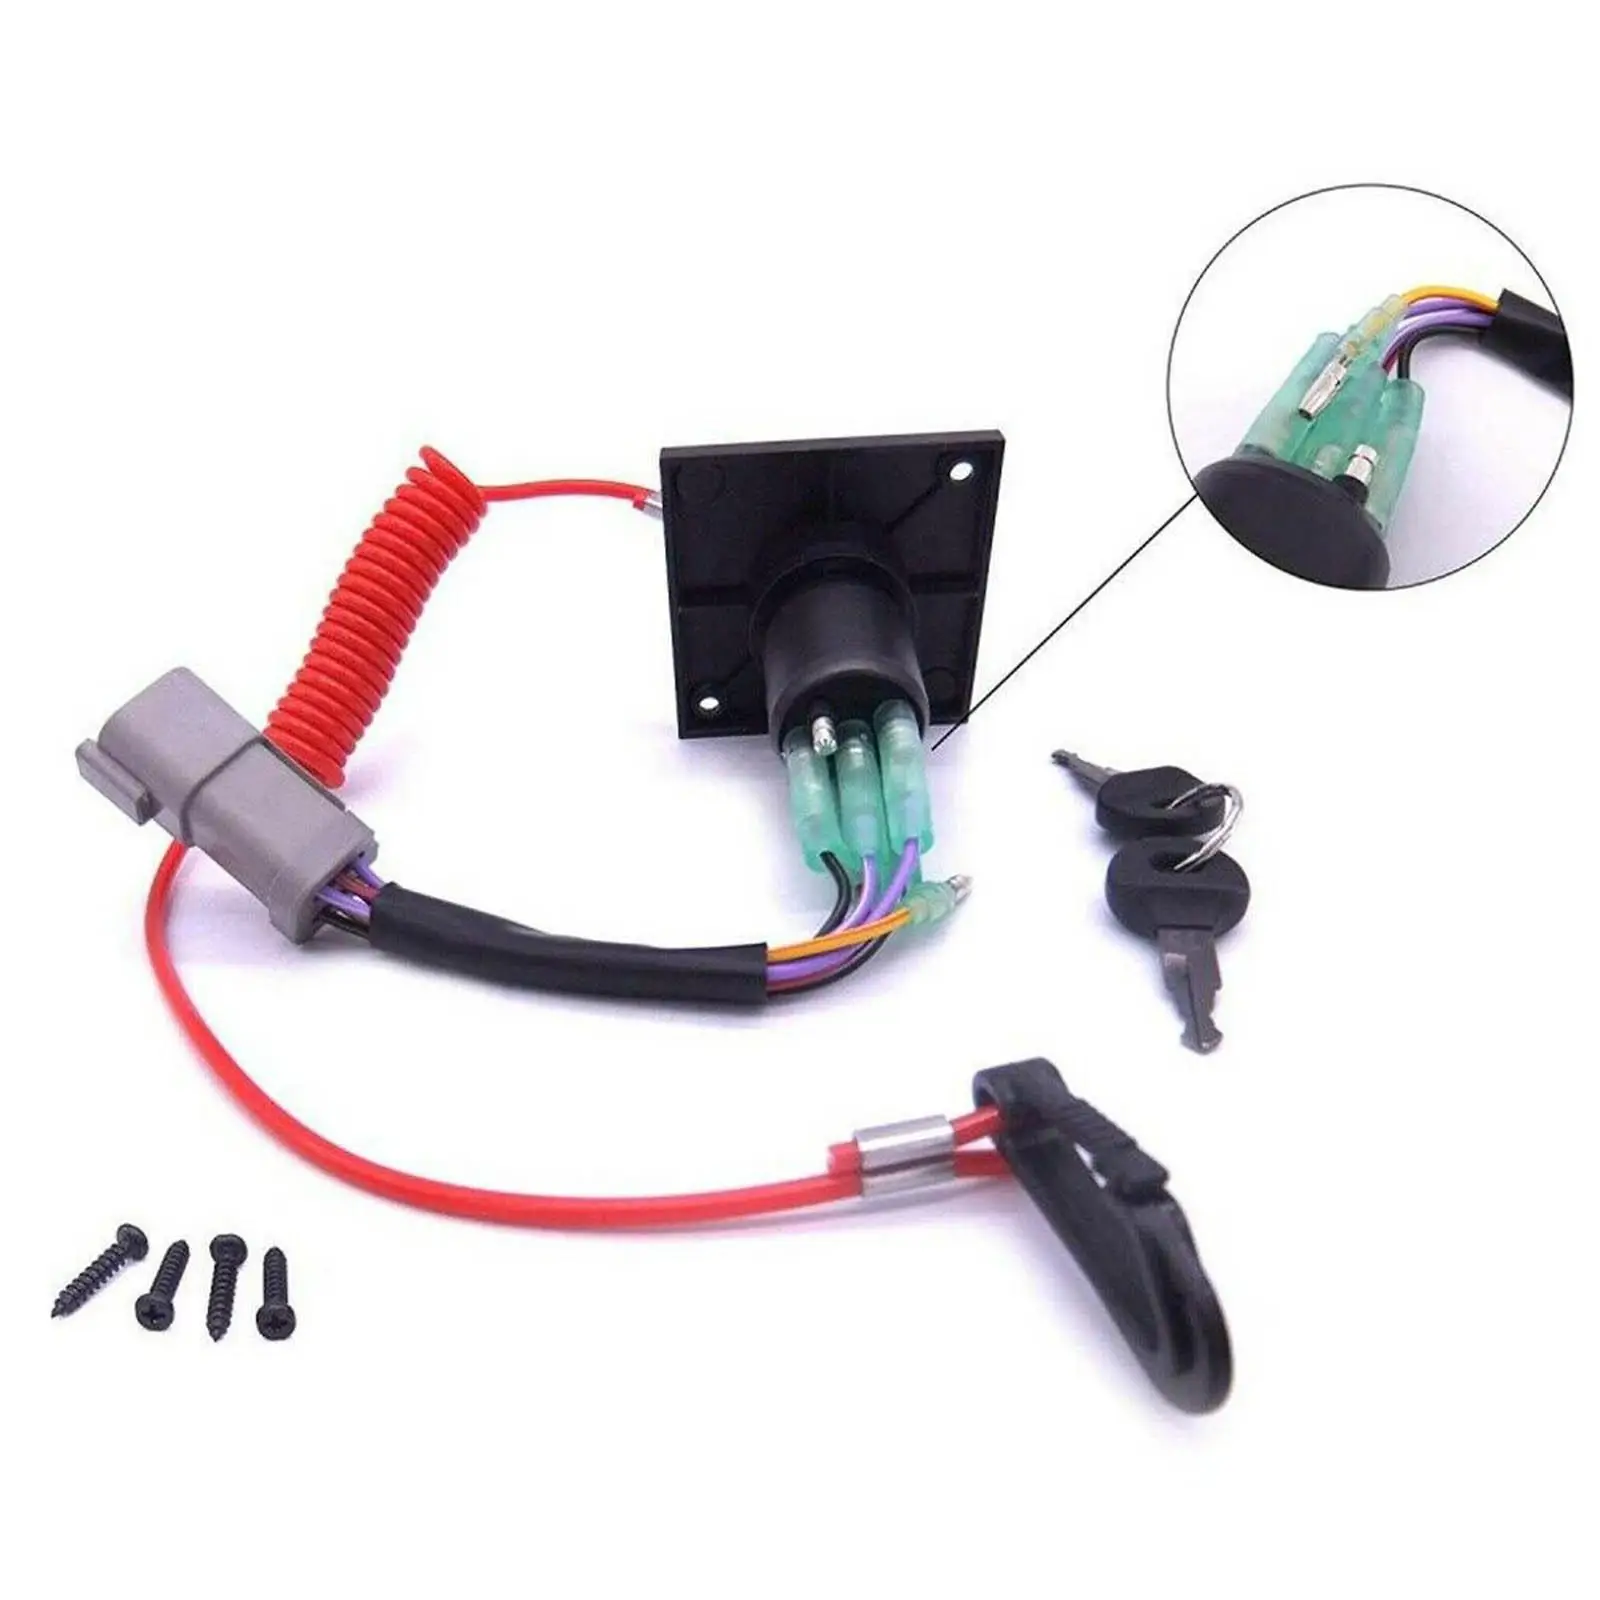 Outboard Single Engine Ignition Key Switch Panel Fit for Johnson Evinrude Outboard Engine Boat with Stop Switch Lanyard Assy